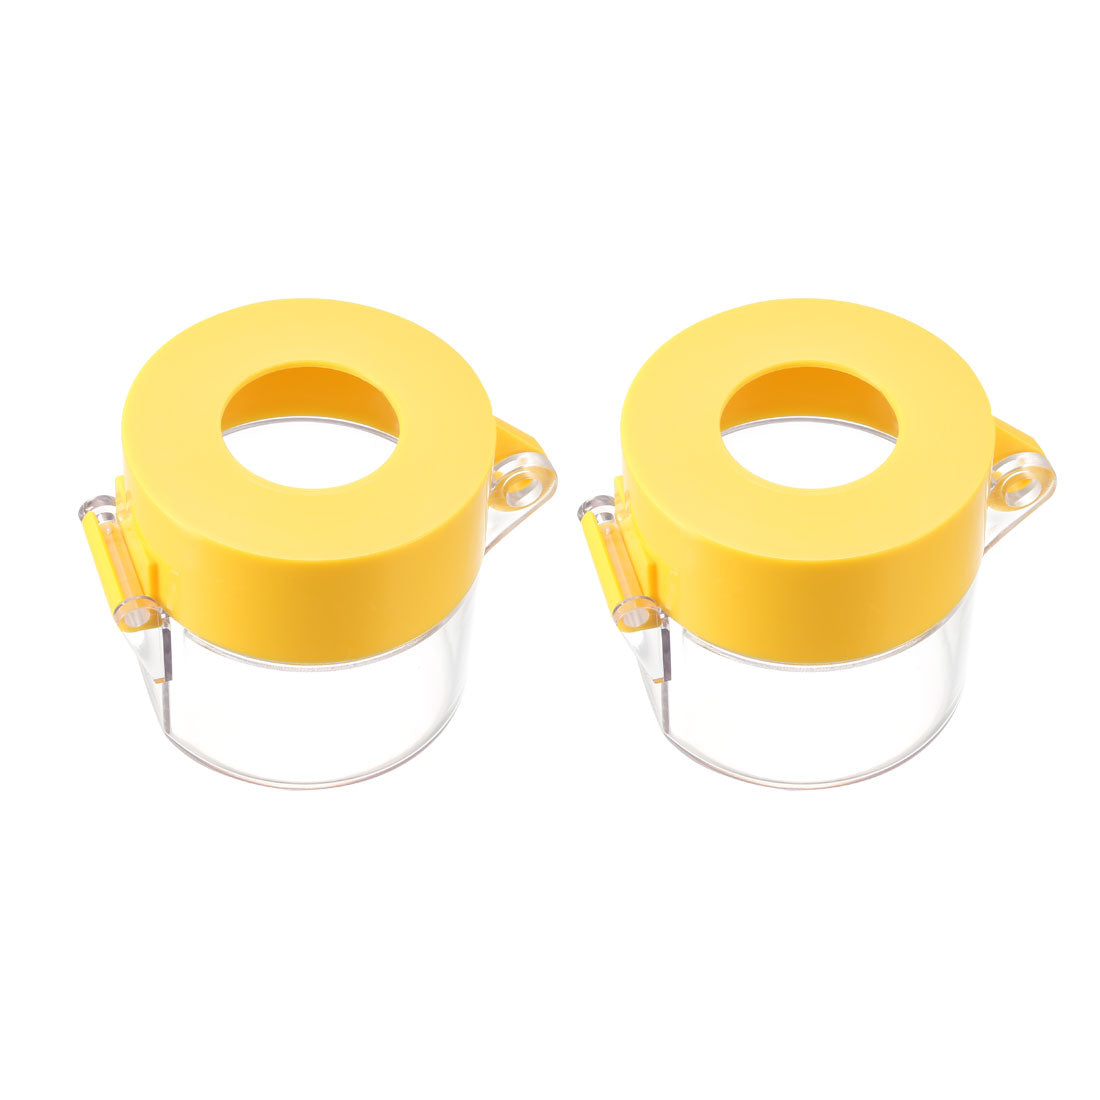 Uxcell Uxcell 2pcs Clear Plasatic Switch Cover Protector for 30mm Diameter Push Button Switch 55*55